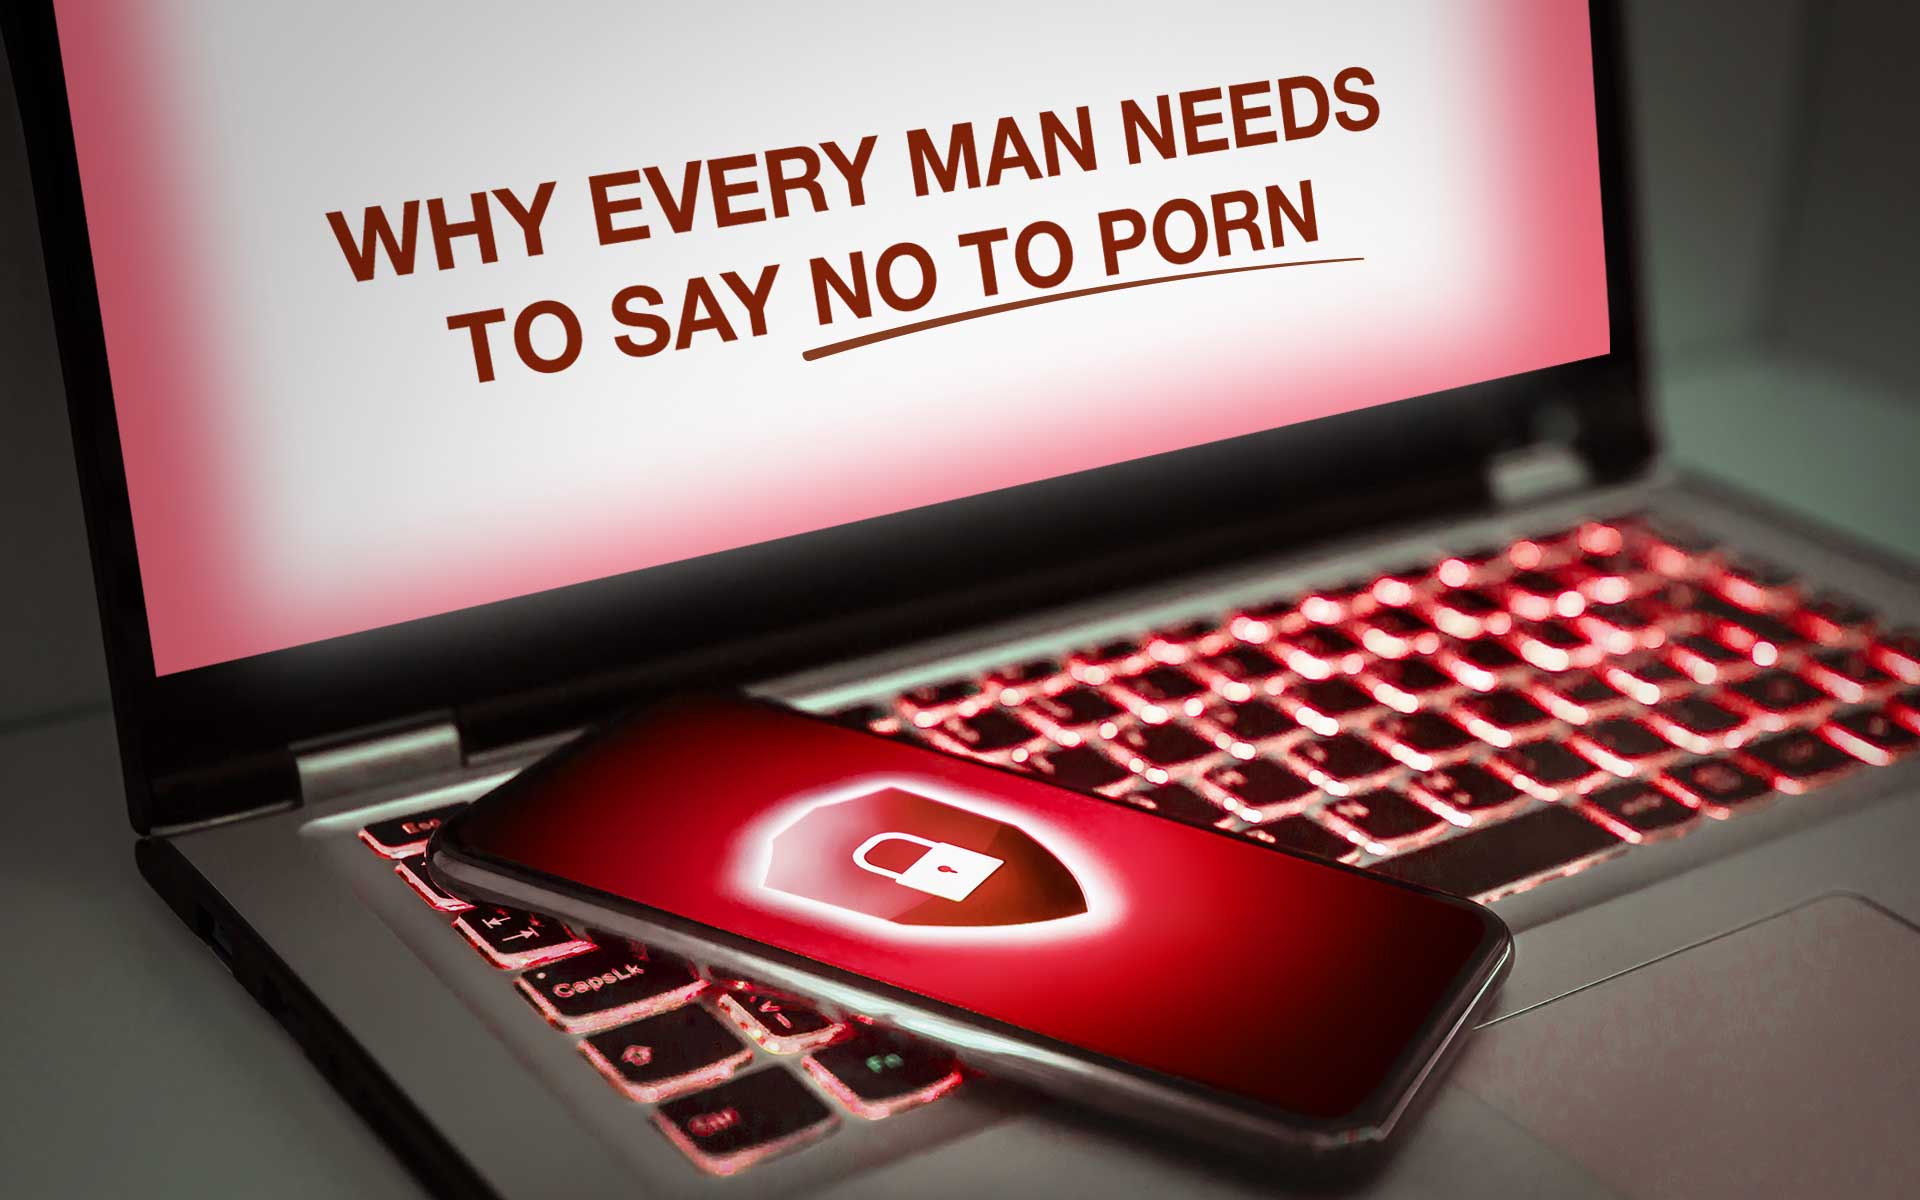 Porn 1920x1200 - Why Every Man Needs to Say No to Porn